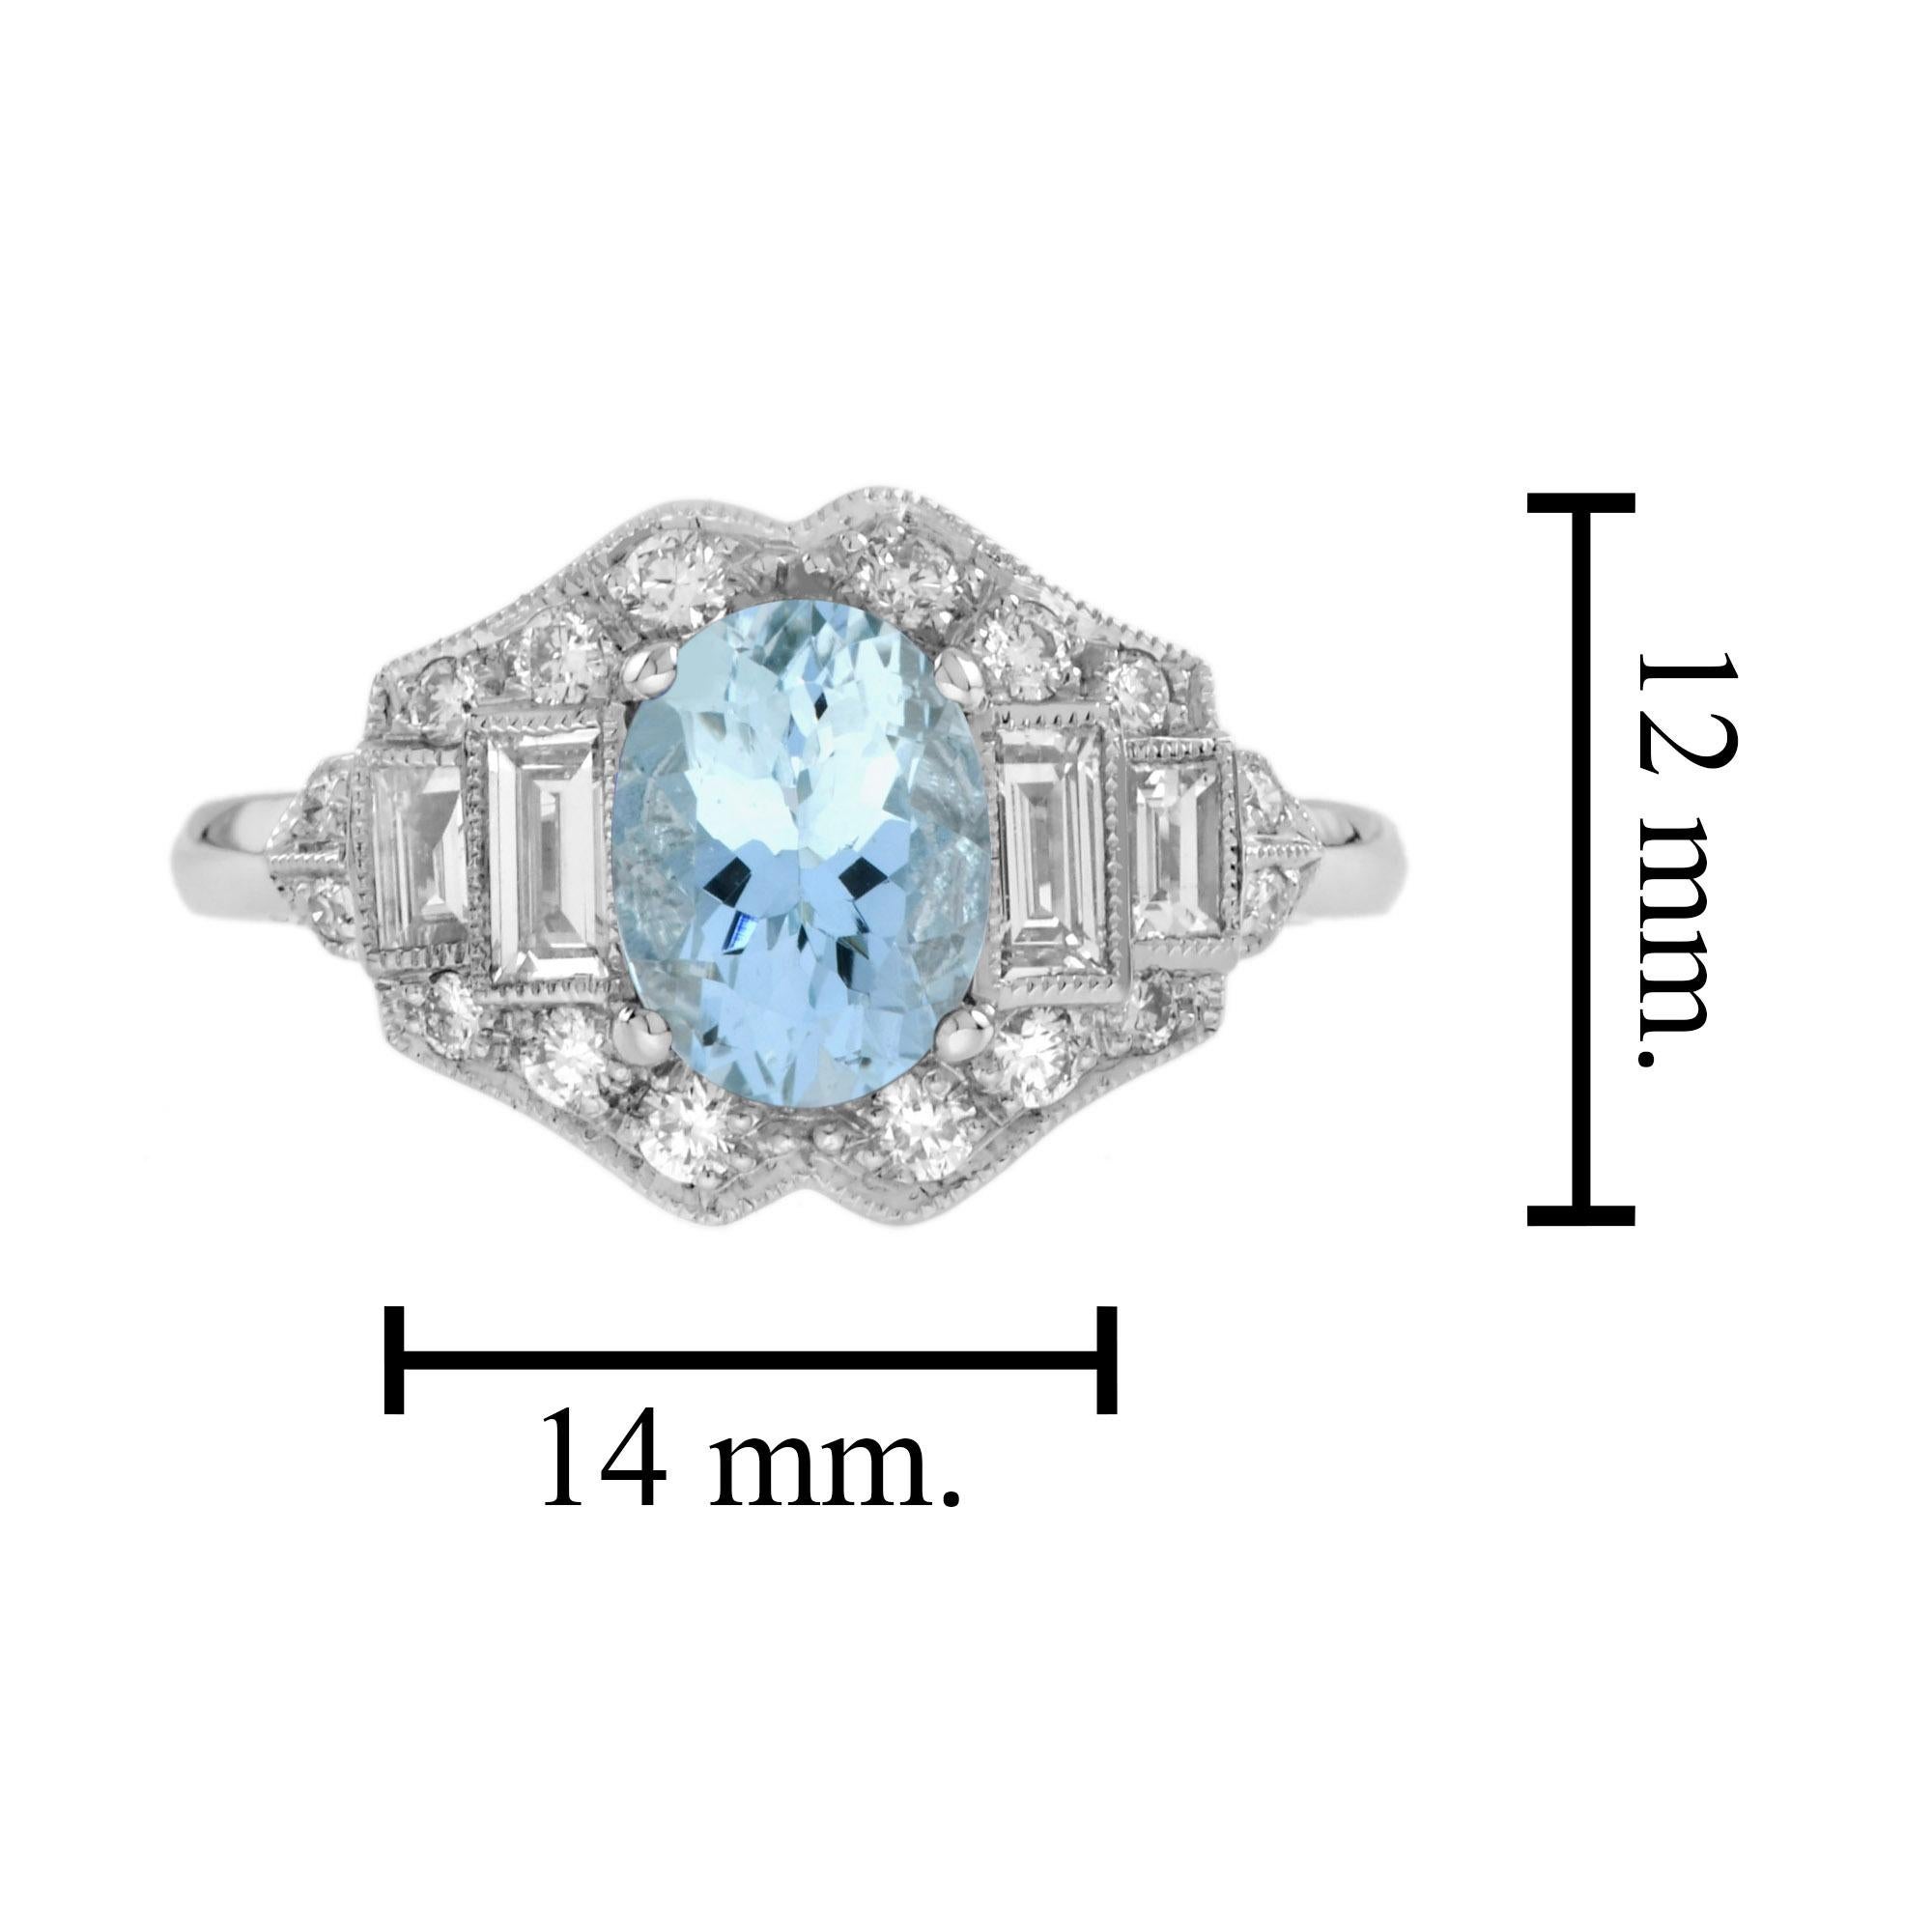 For Sale:  1.50 Ct. Aquamarine and Diamond Art Deco Style Engagement Ring in 18K Gold 7